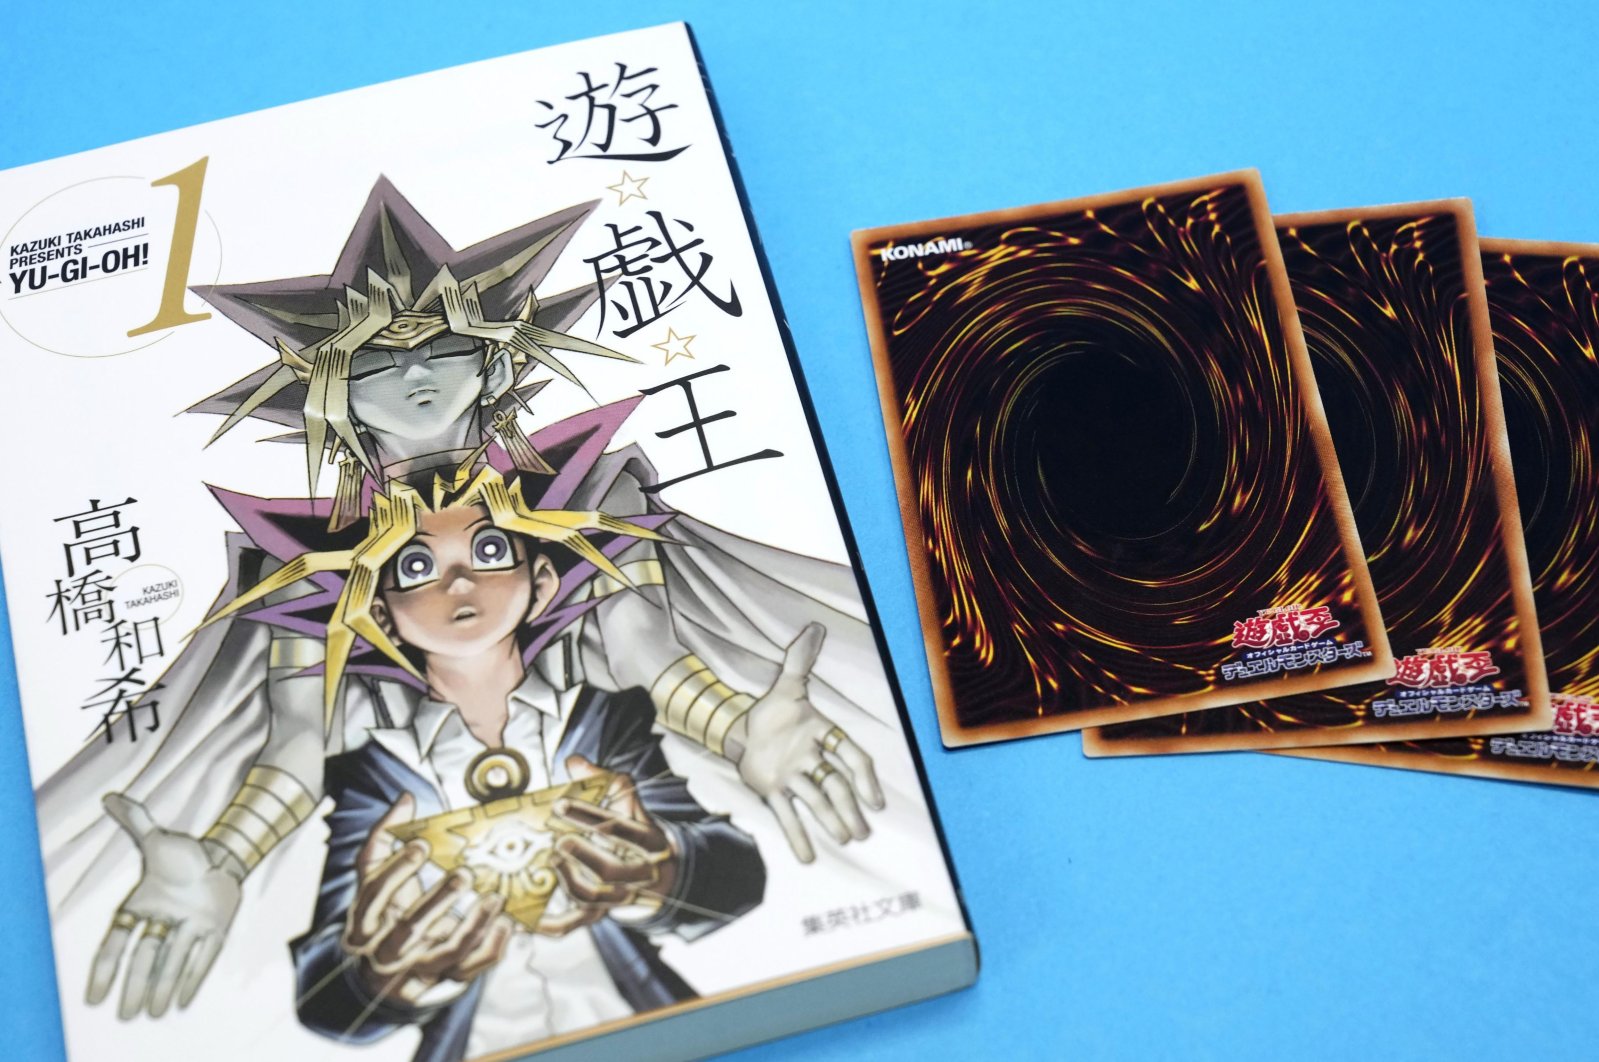 This photo shows &quot;Yu-Gi-Oh!” manga comic and trading cards in Tokyo, Japan, July 7, 2022. (Kyodo News via AP)